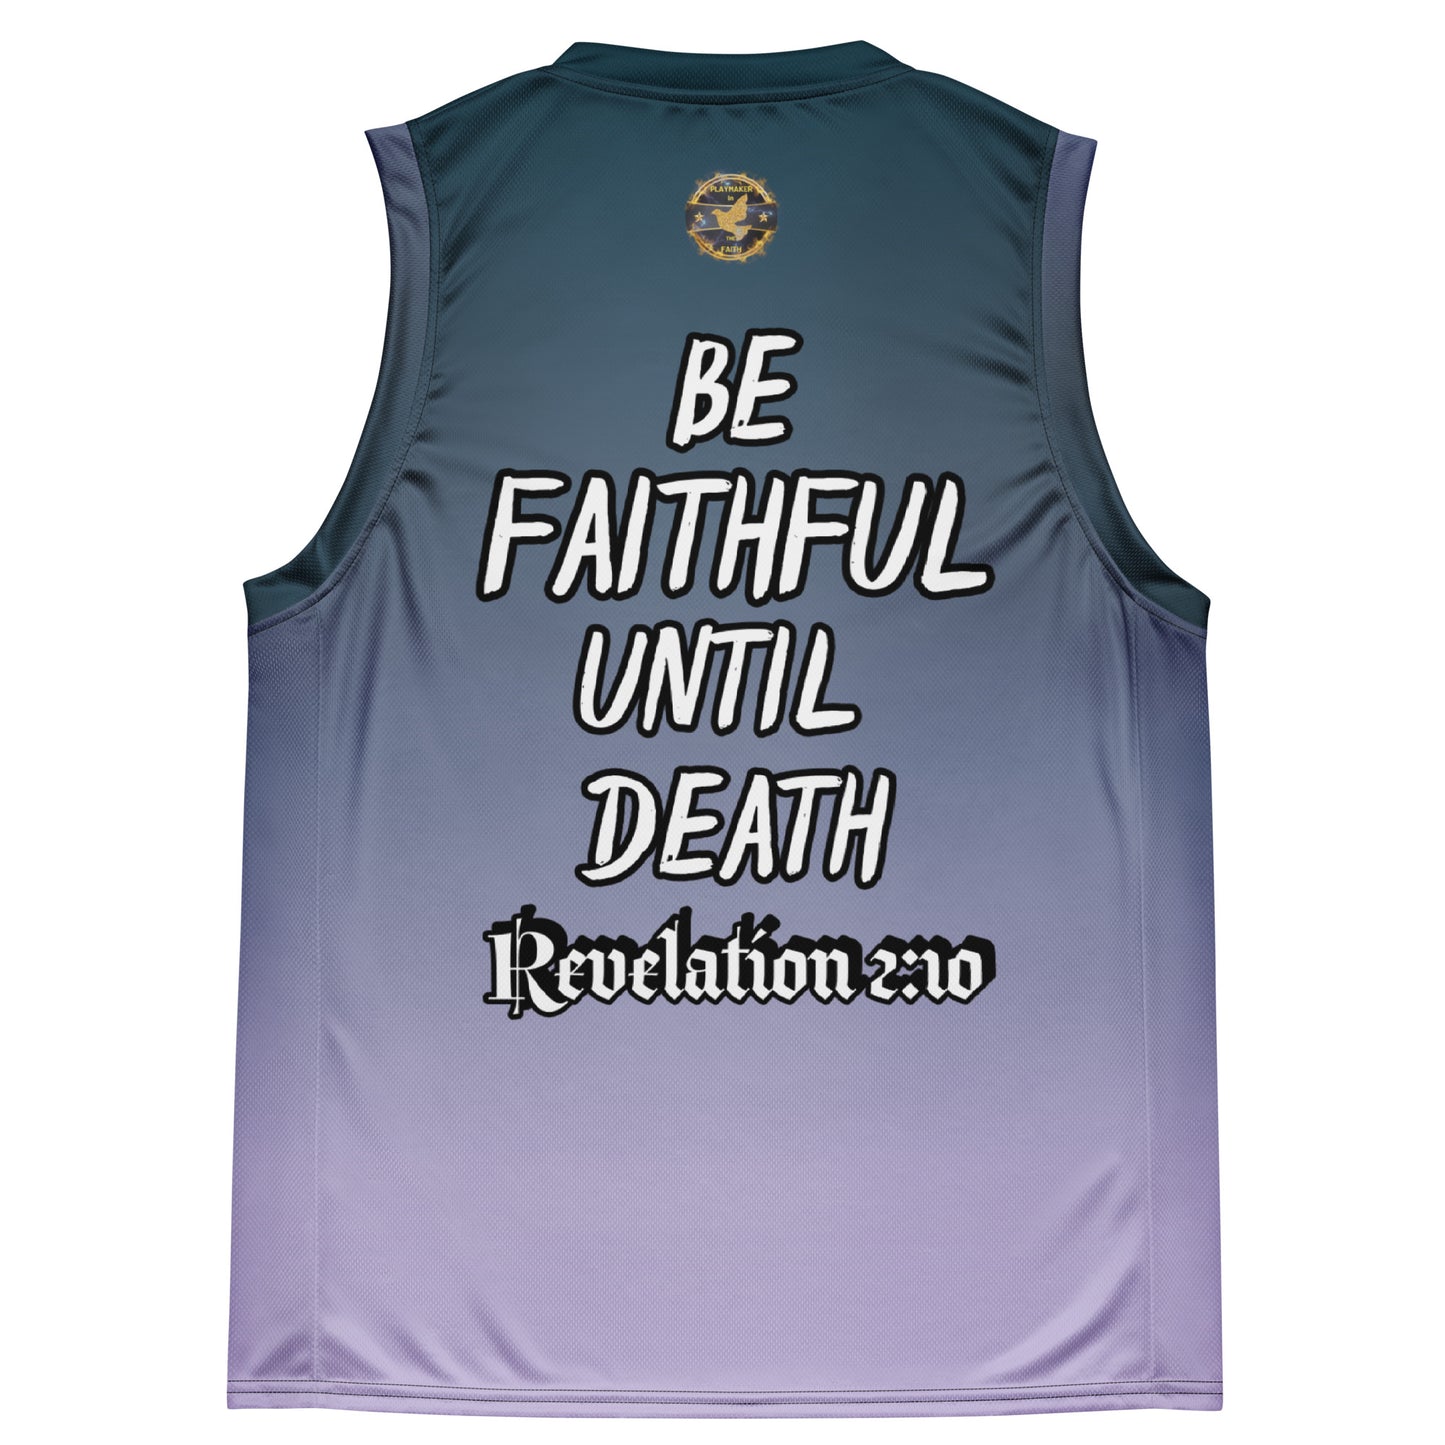 "Be Faithful Until Death" Playmaker In The Faith Recycled unisex basketball jersey